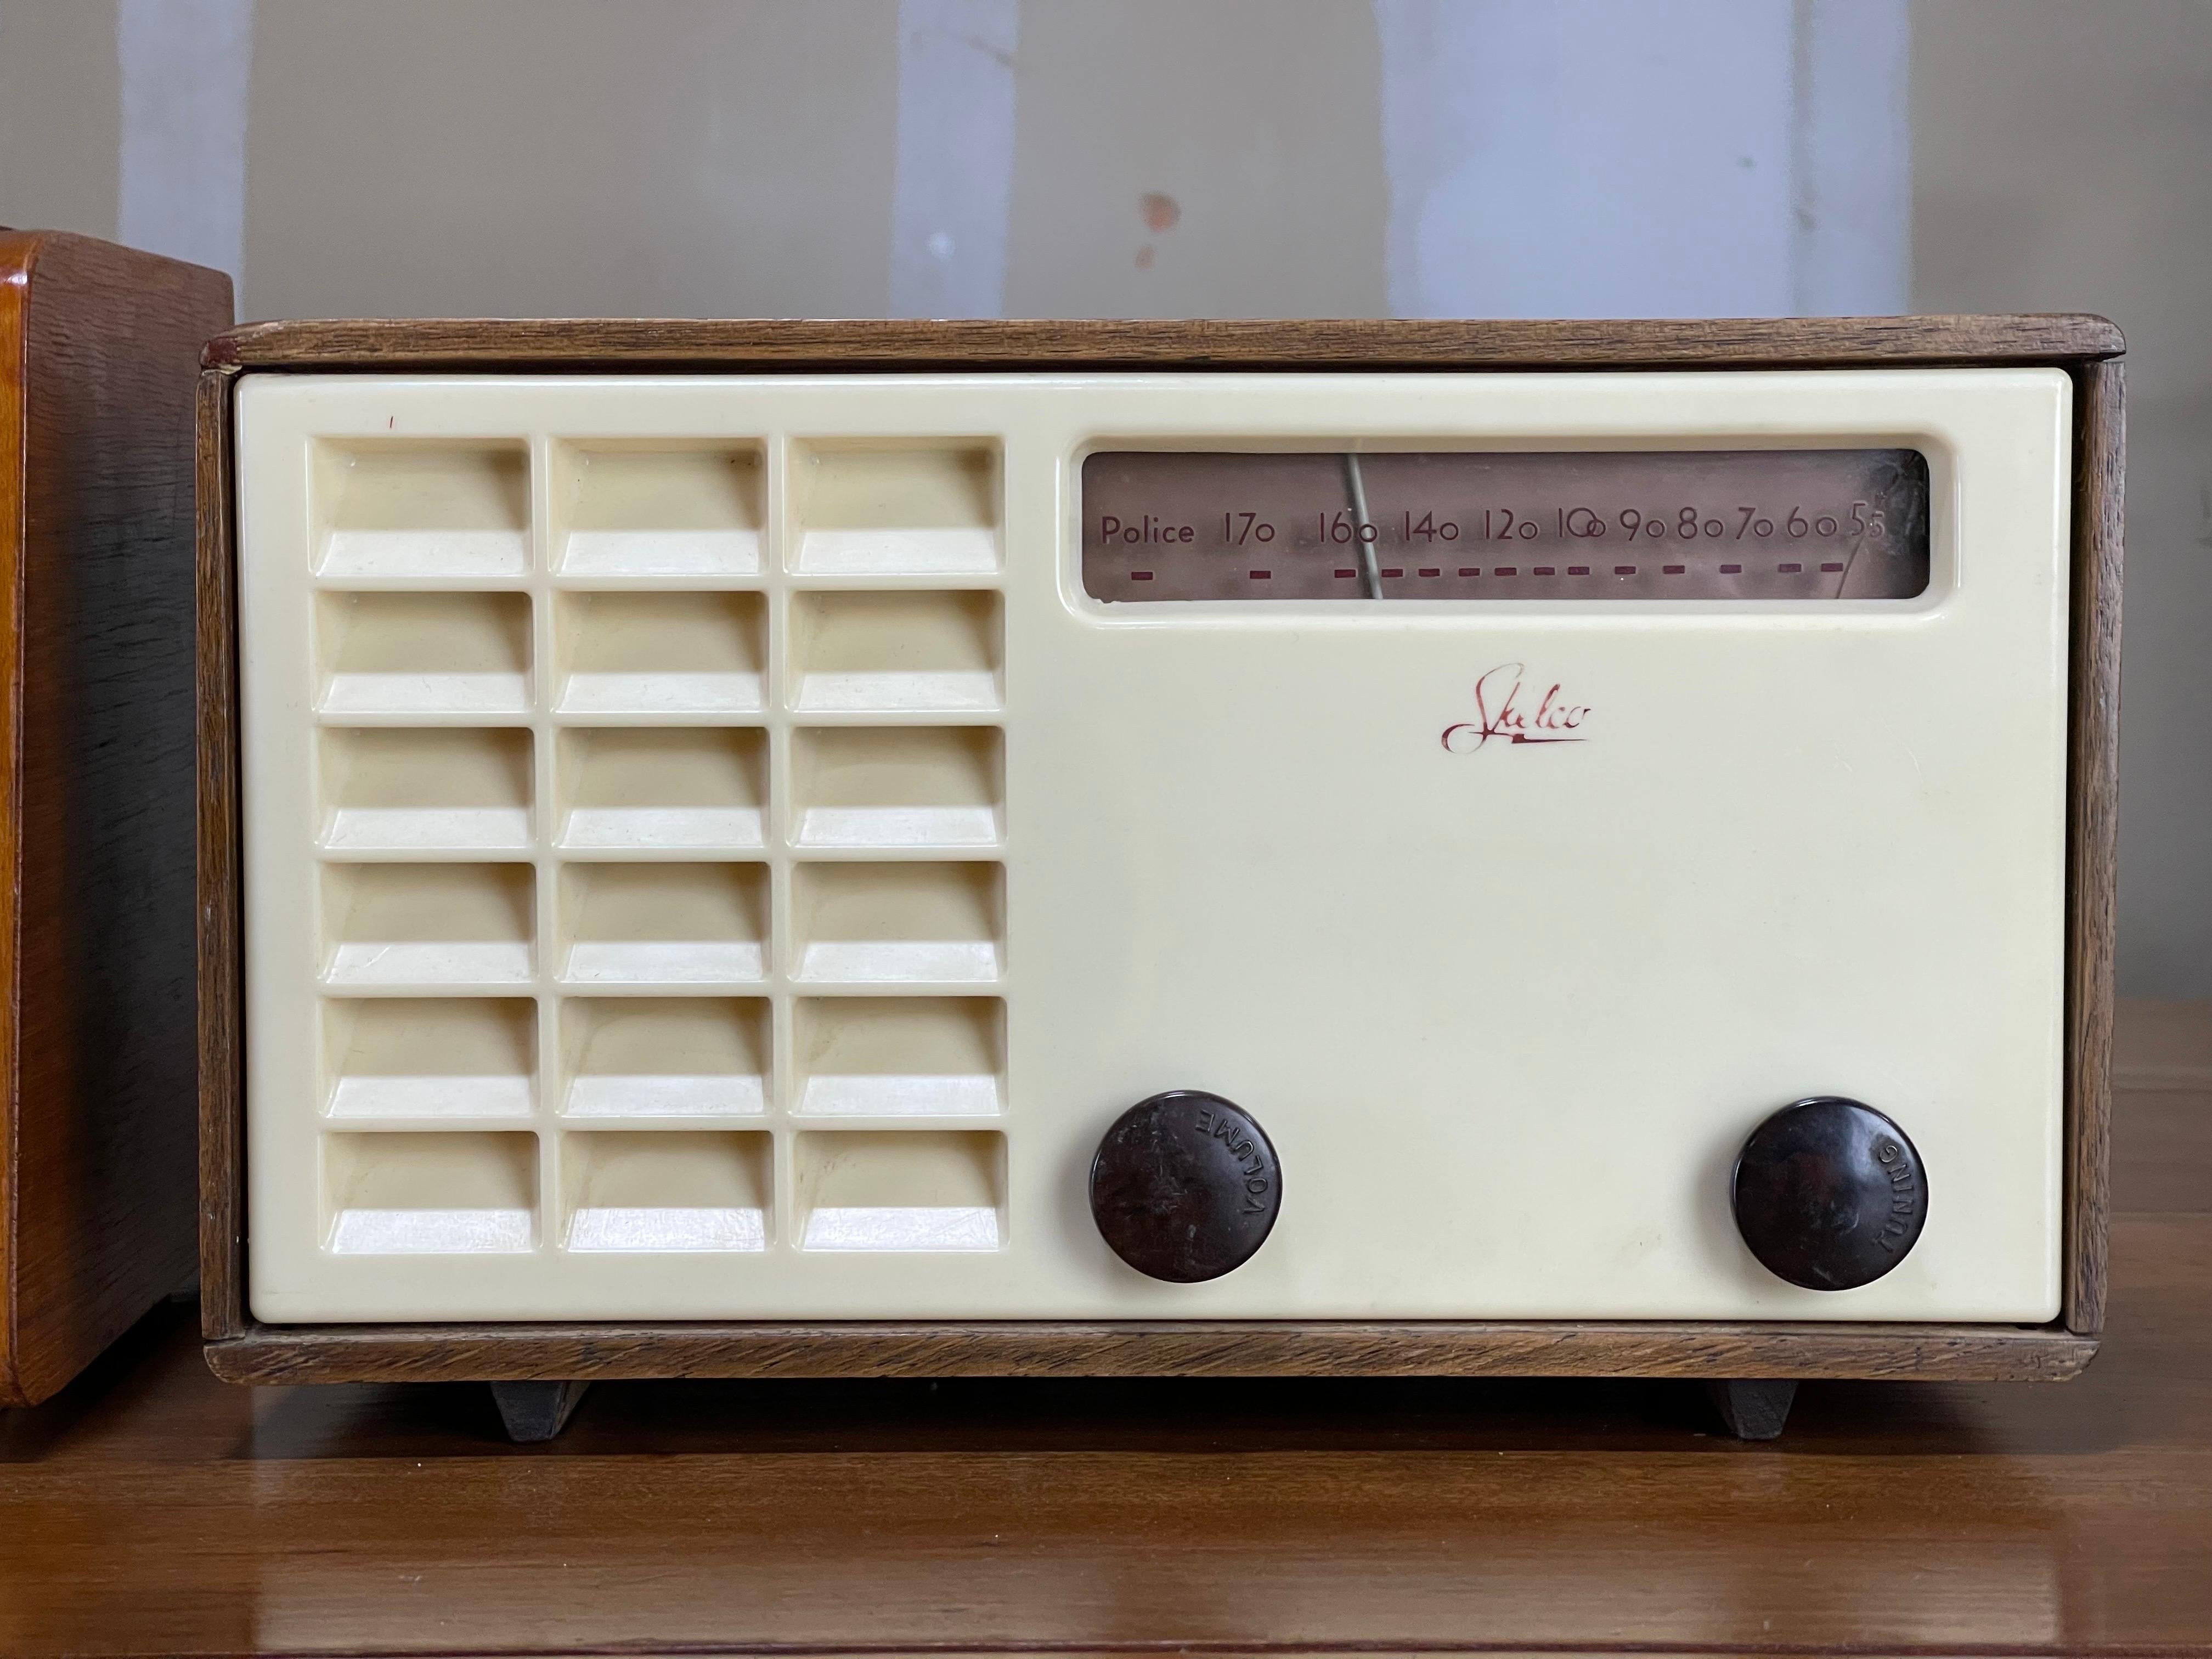 American Collection of Vintage Antique Alexander Girard Radios For Sale